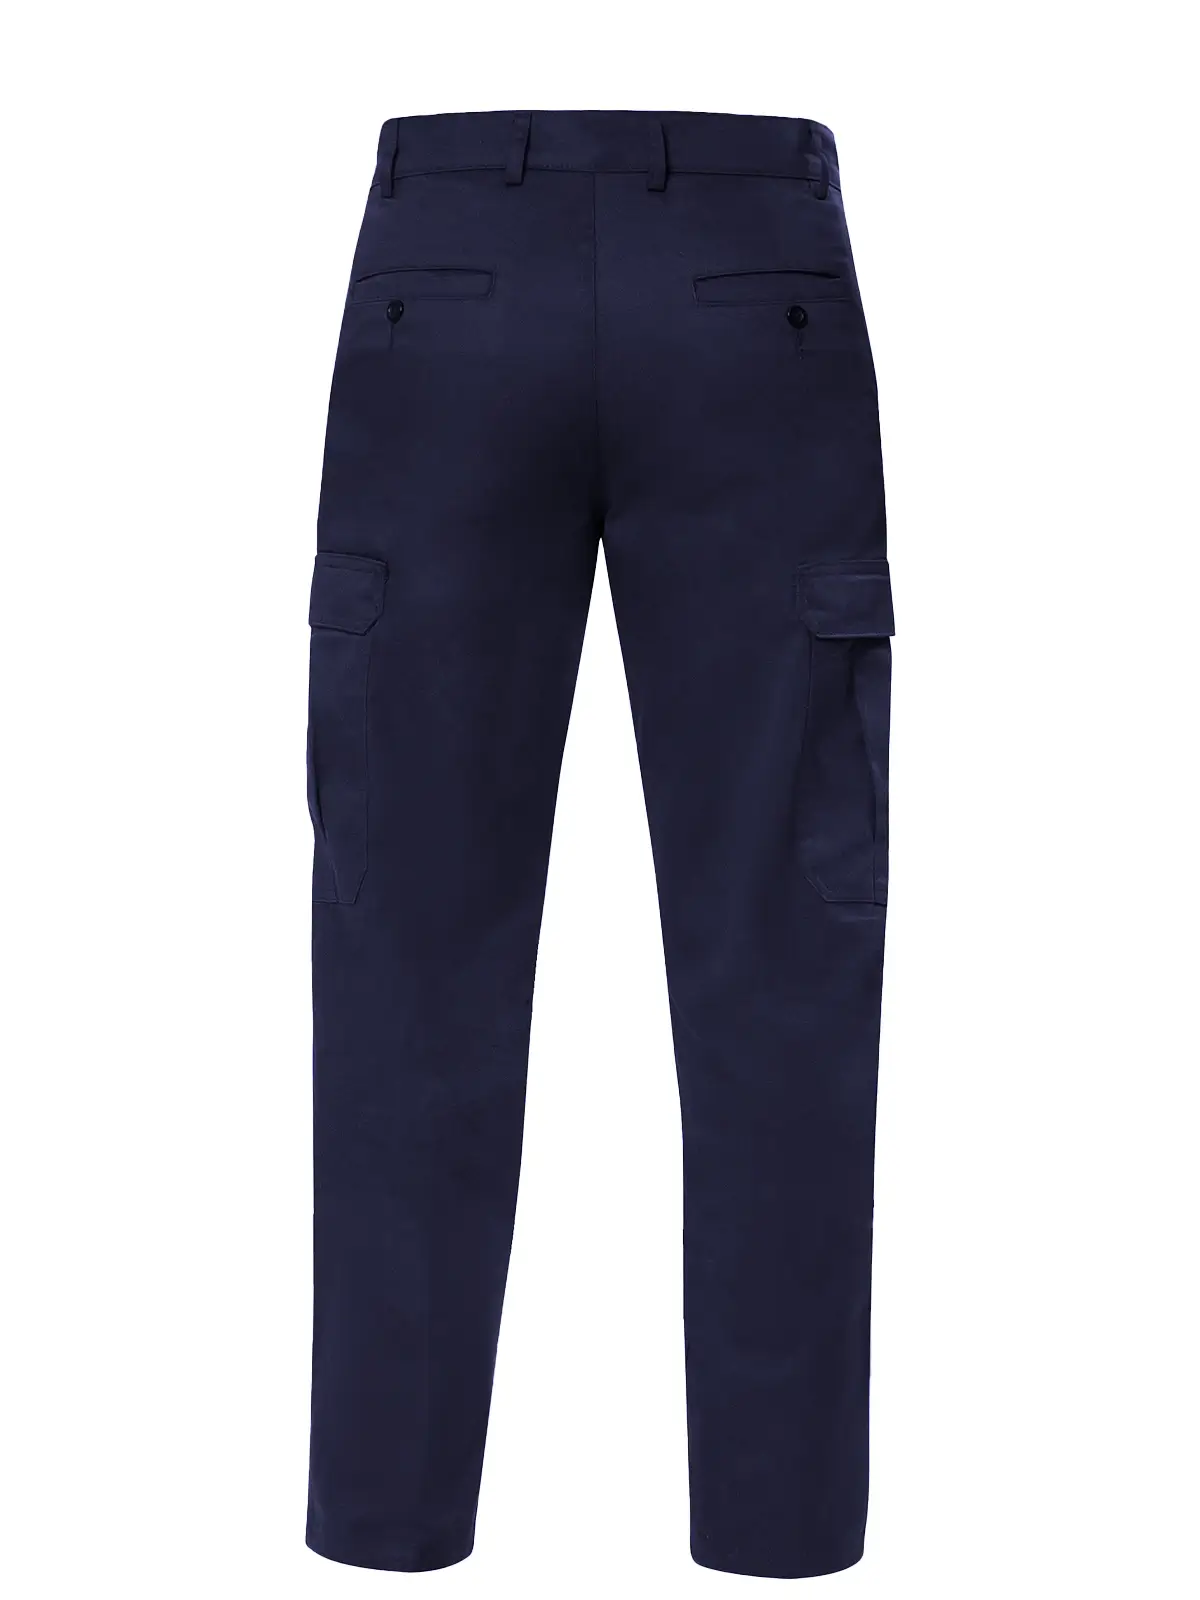 Navy blue cargo Pants rear view